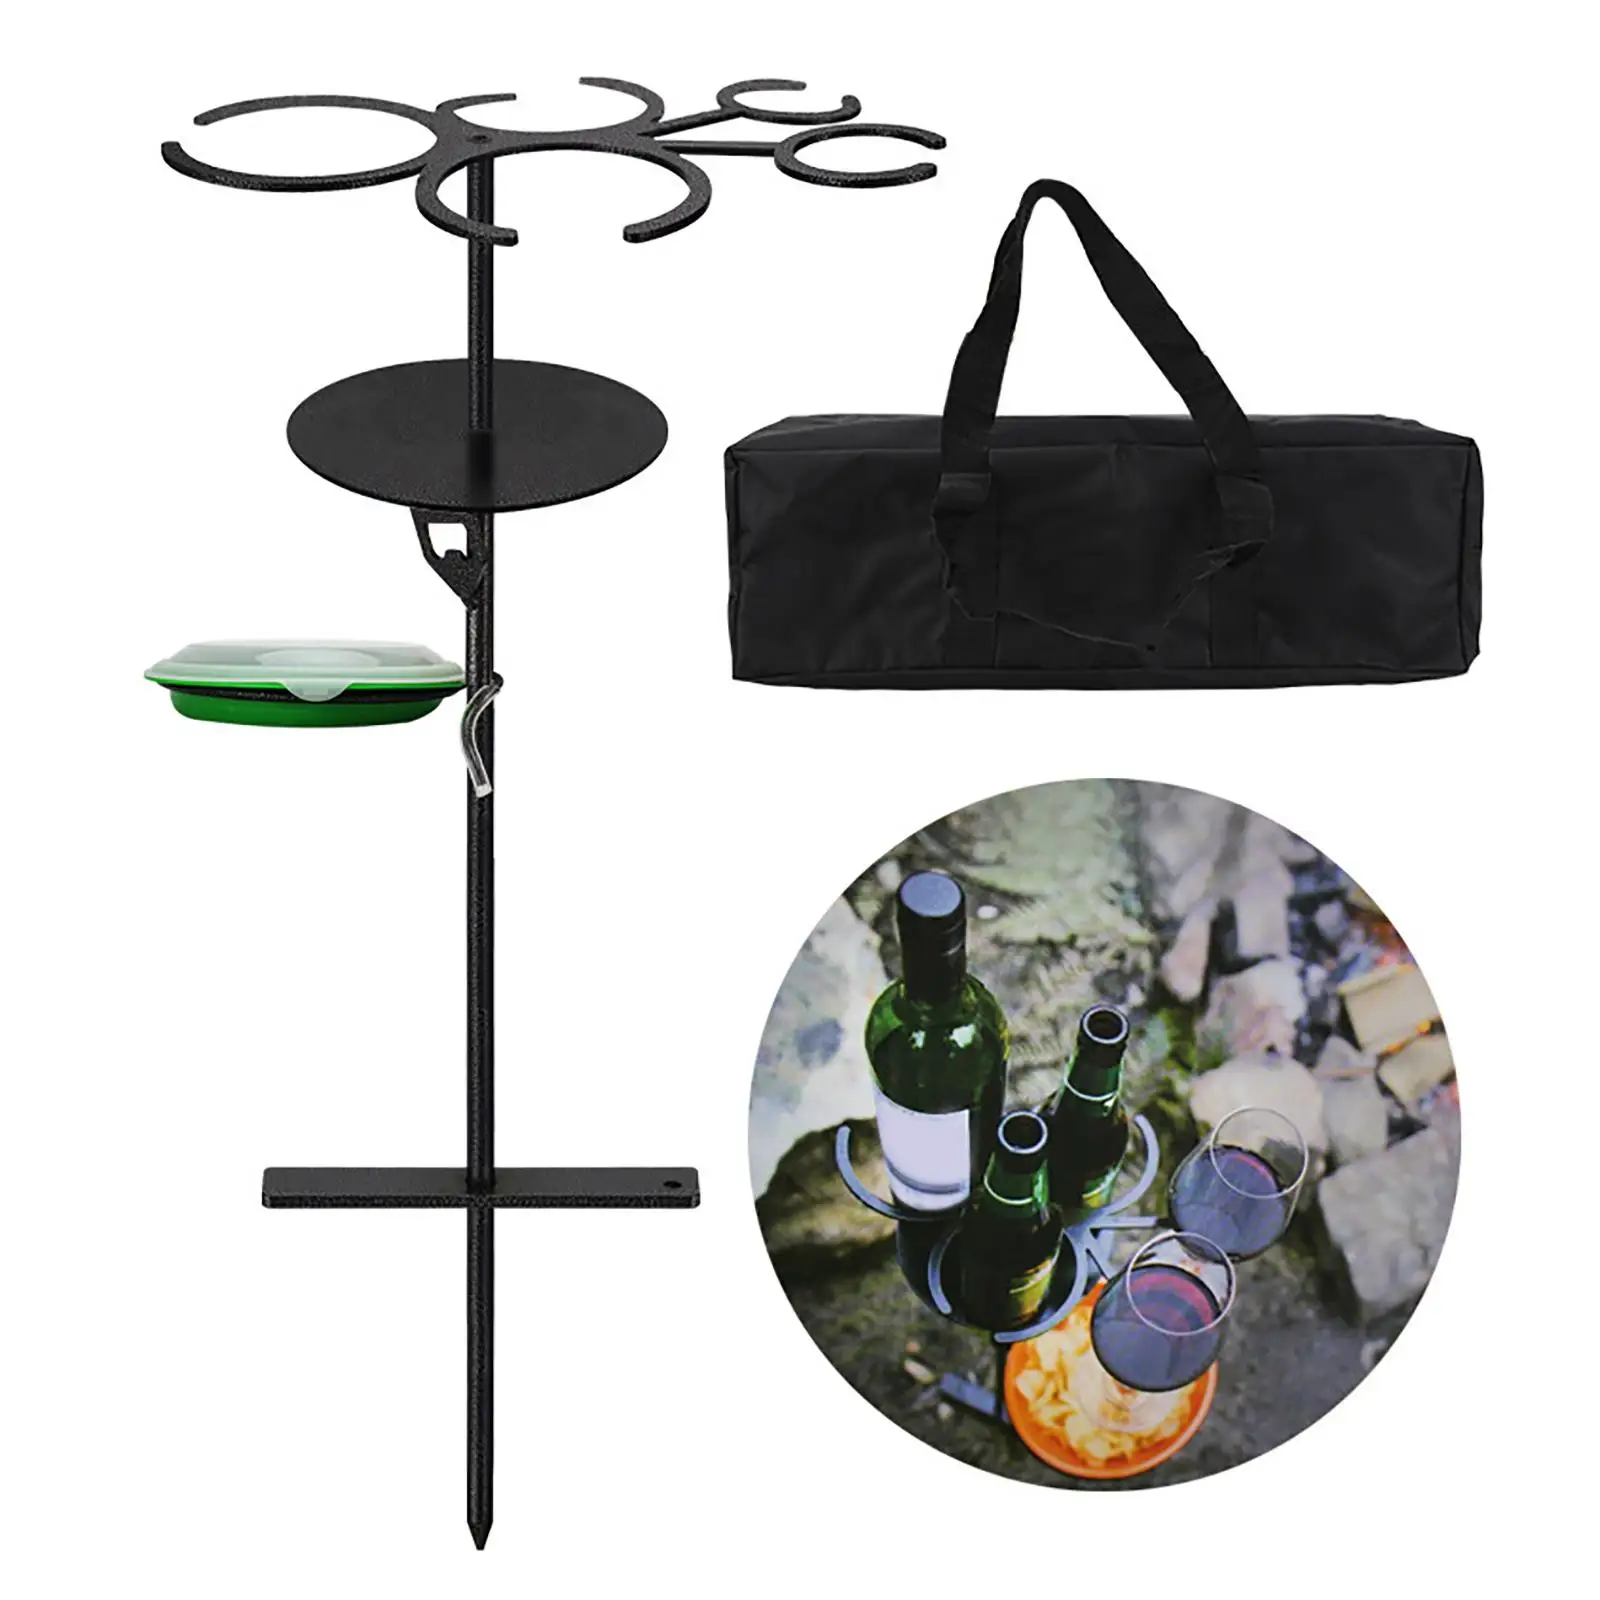 Portable Outdoor Wine Table, Easy to Carry Durable Folding Bottles Rack Stand Glass Holder for Sand and Grass Trip Snack Lovers